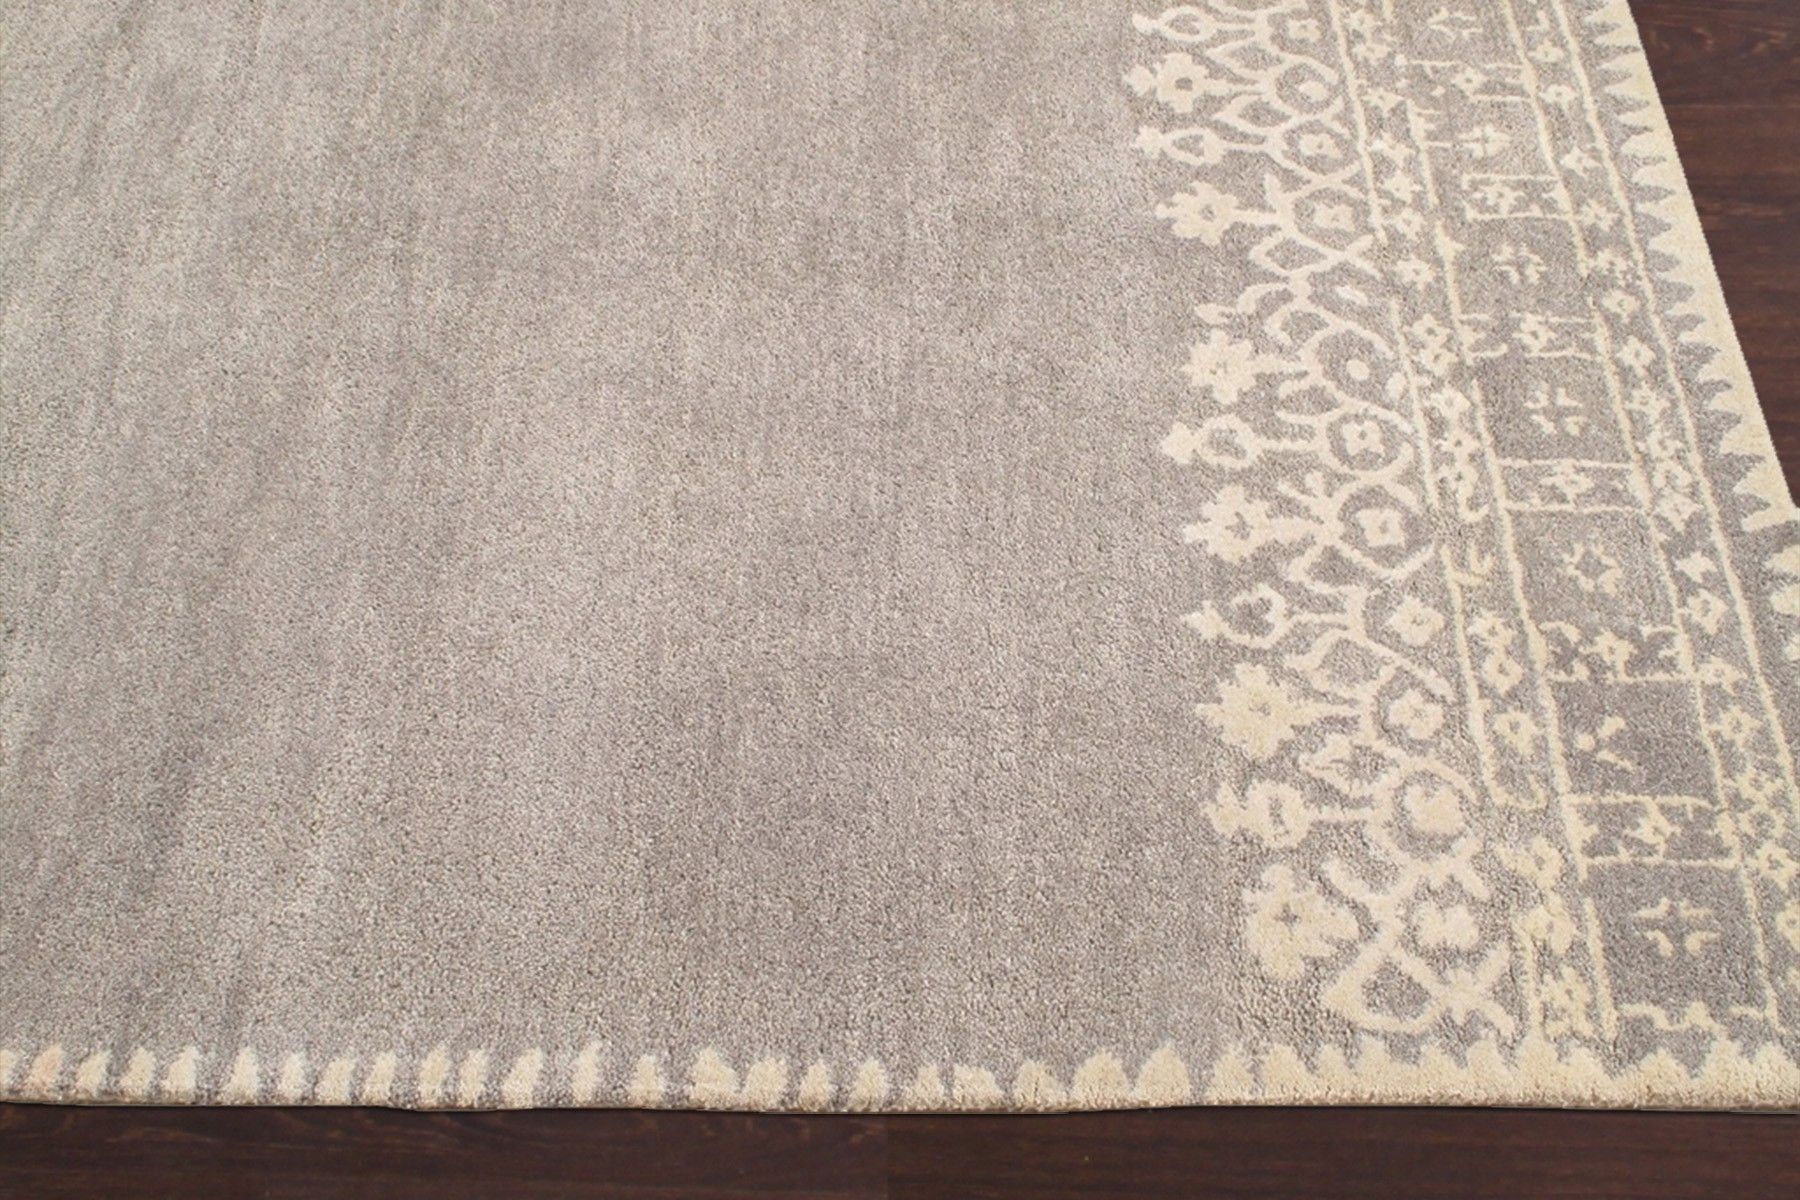 Wool Area Rugs Square Making Wool Area Rugs Design Ideas Decor With Regard To Square Wool Area Rugs (Photo 2 of 15)